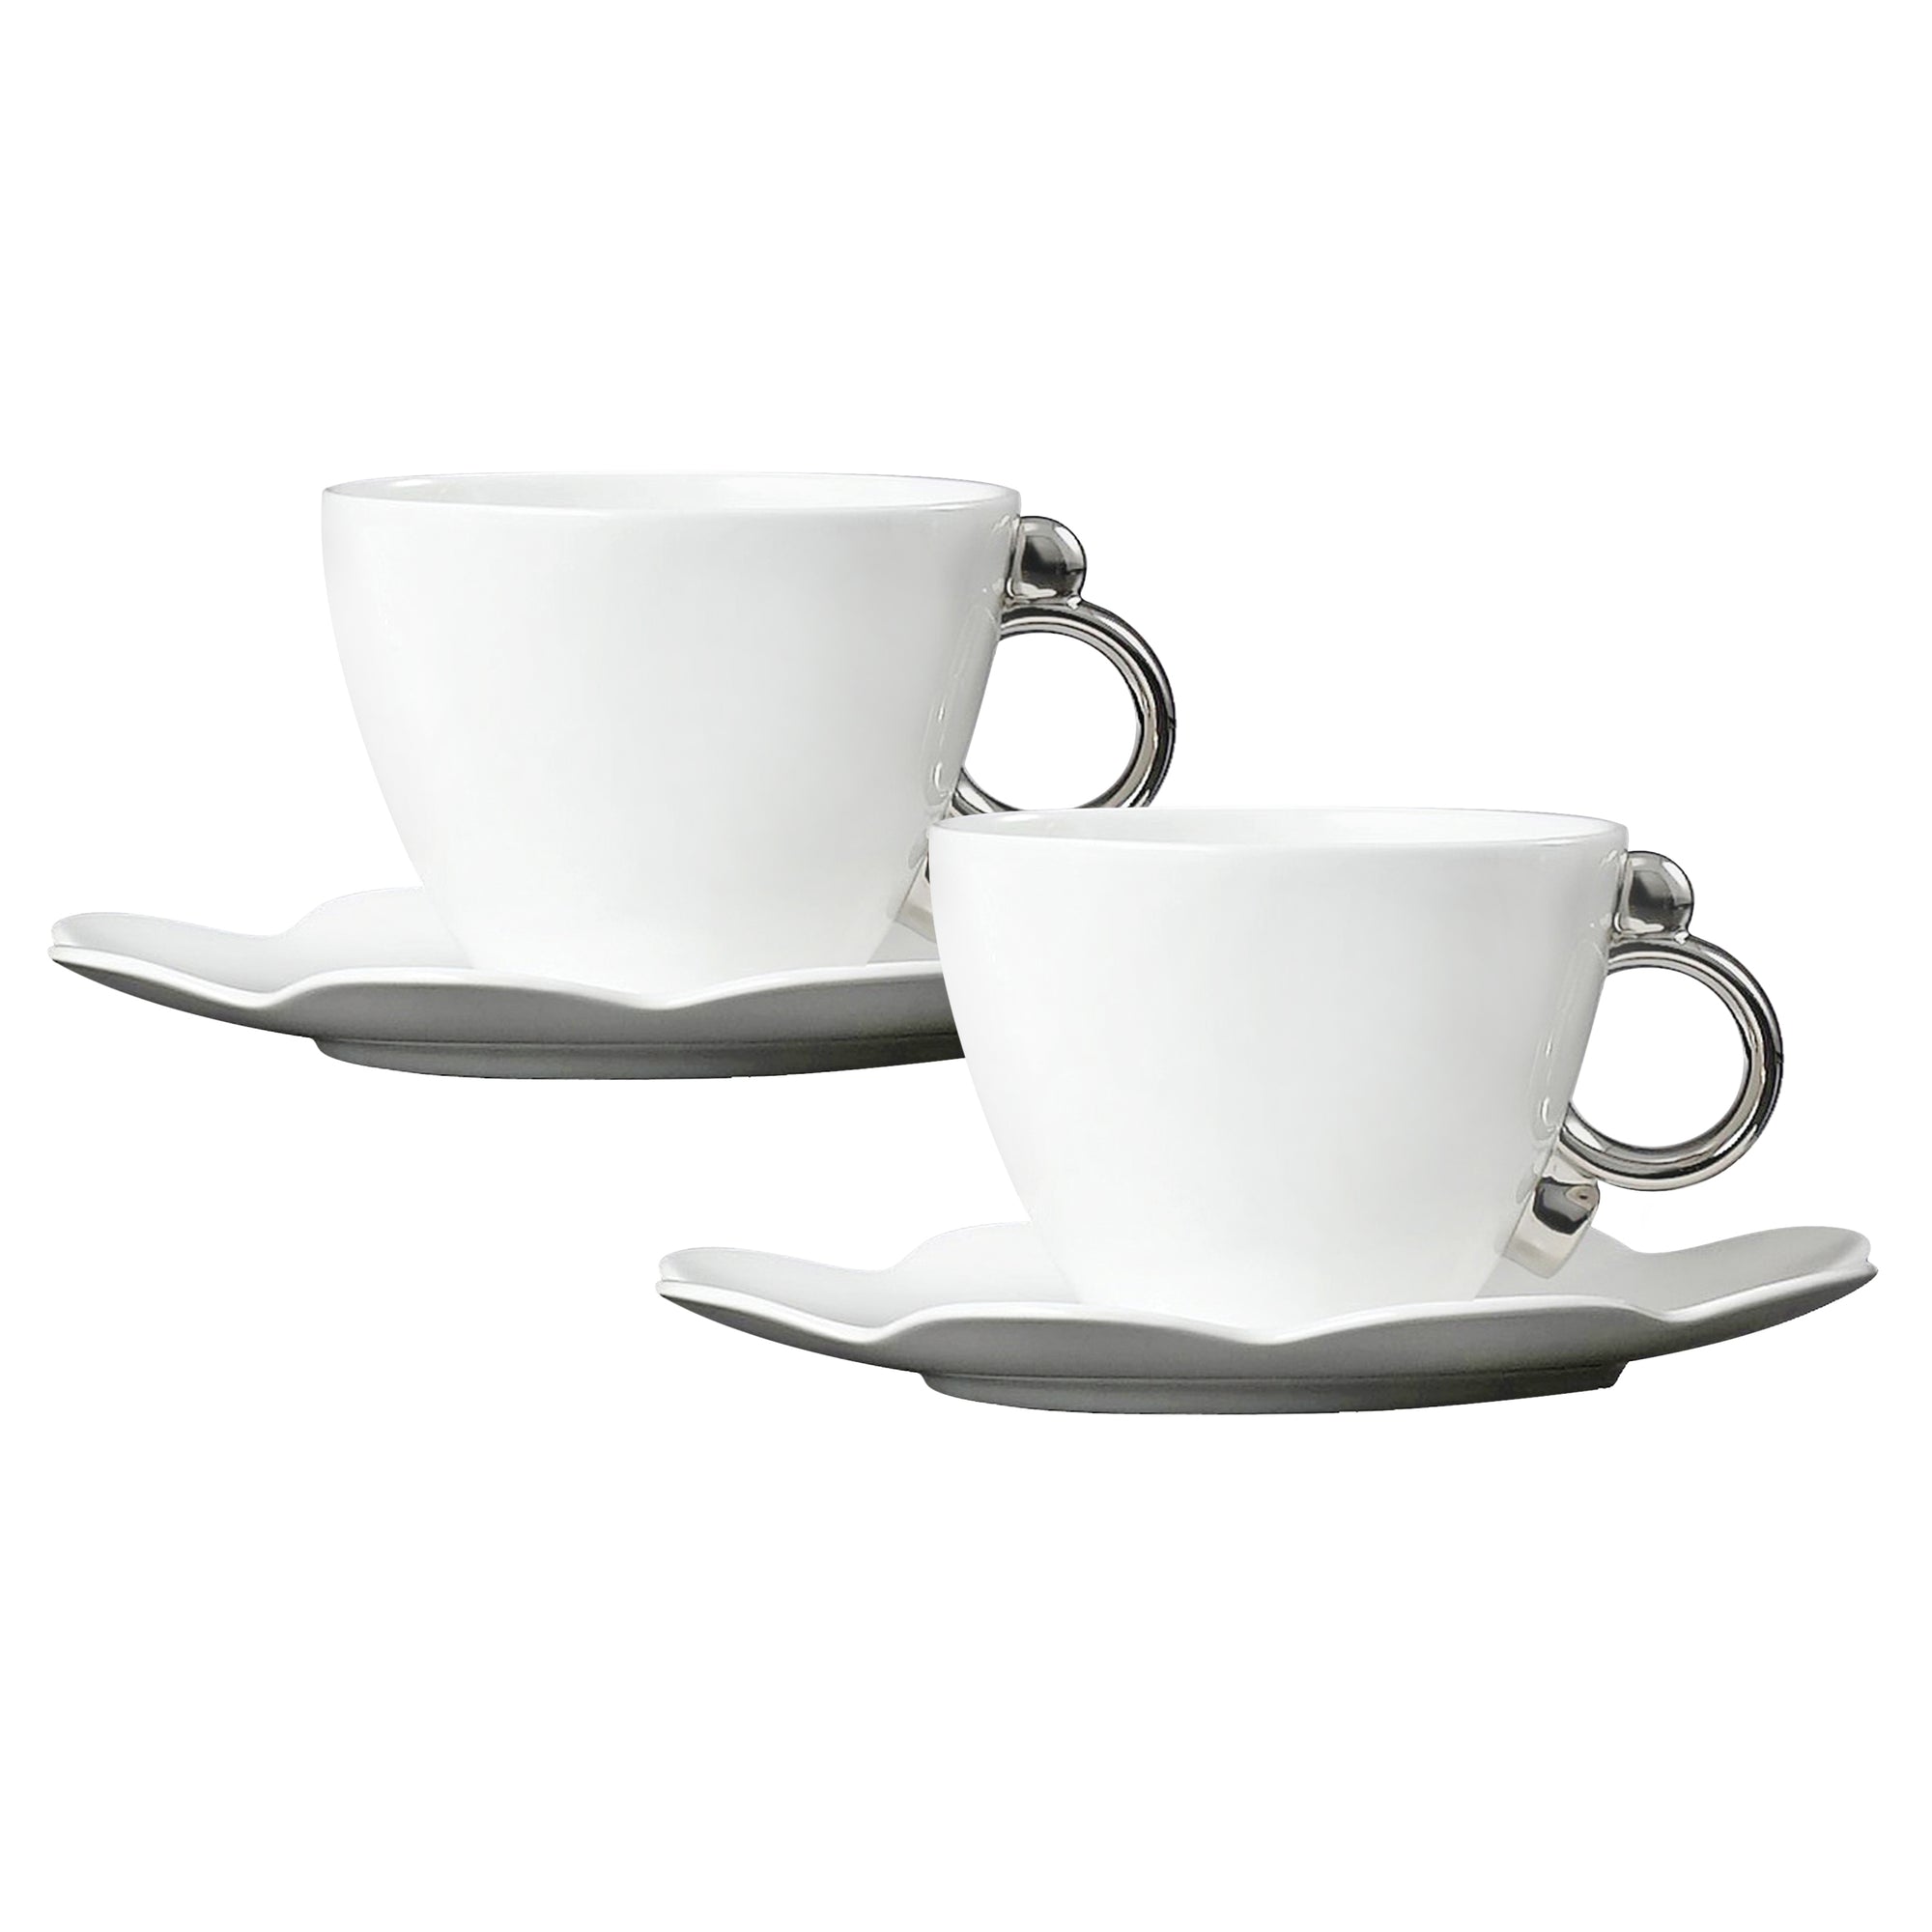 Prouna Cup & Saucer with Gold Rim Set of 2 White Background Photo